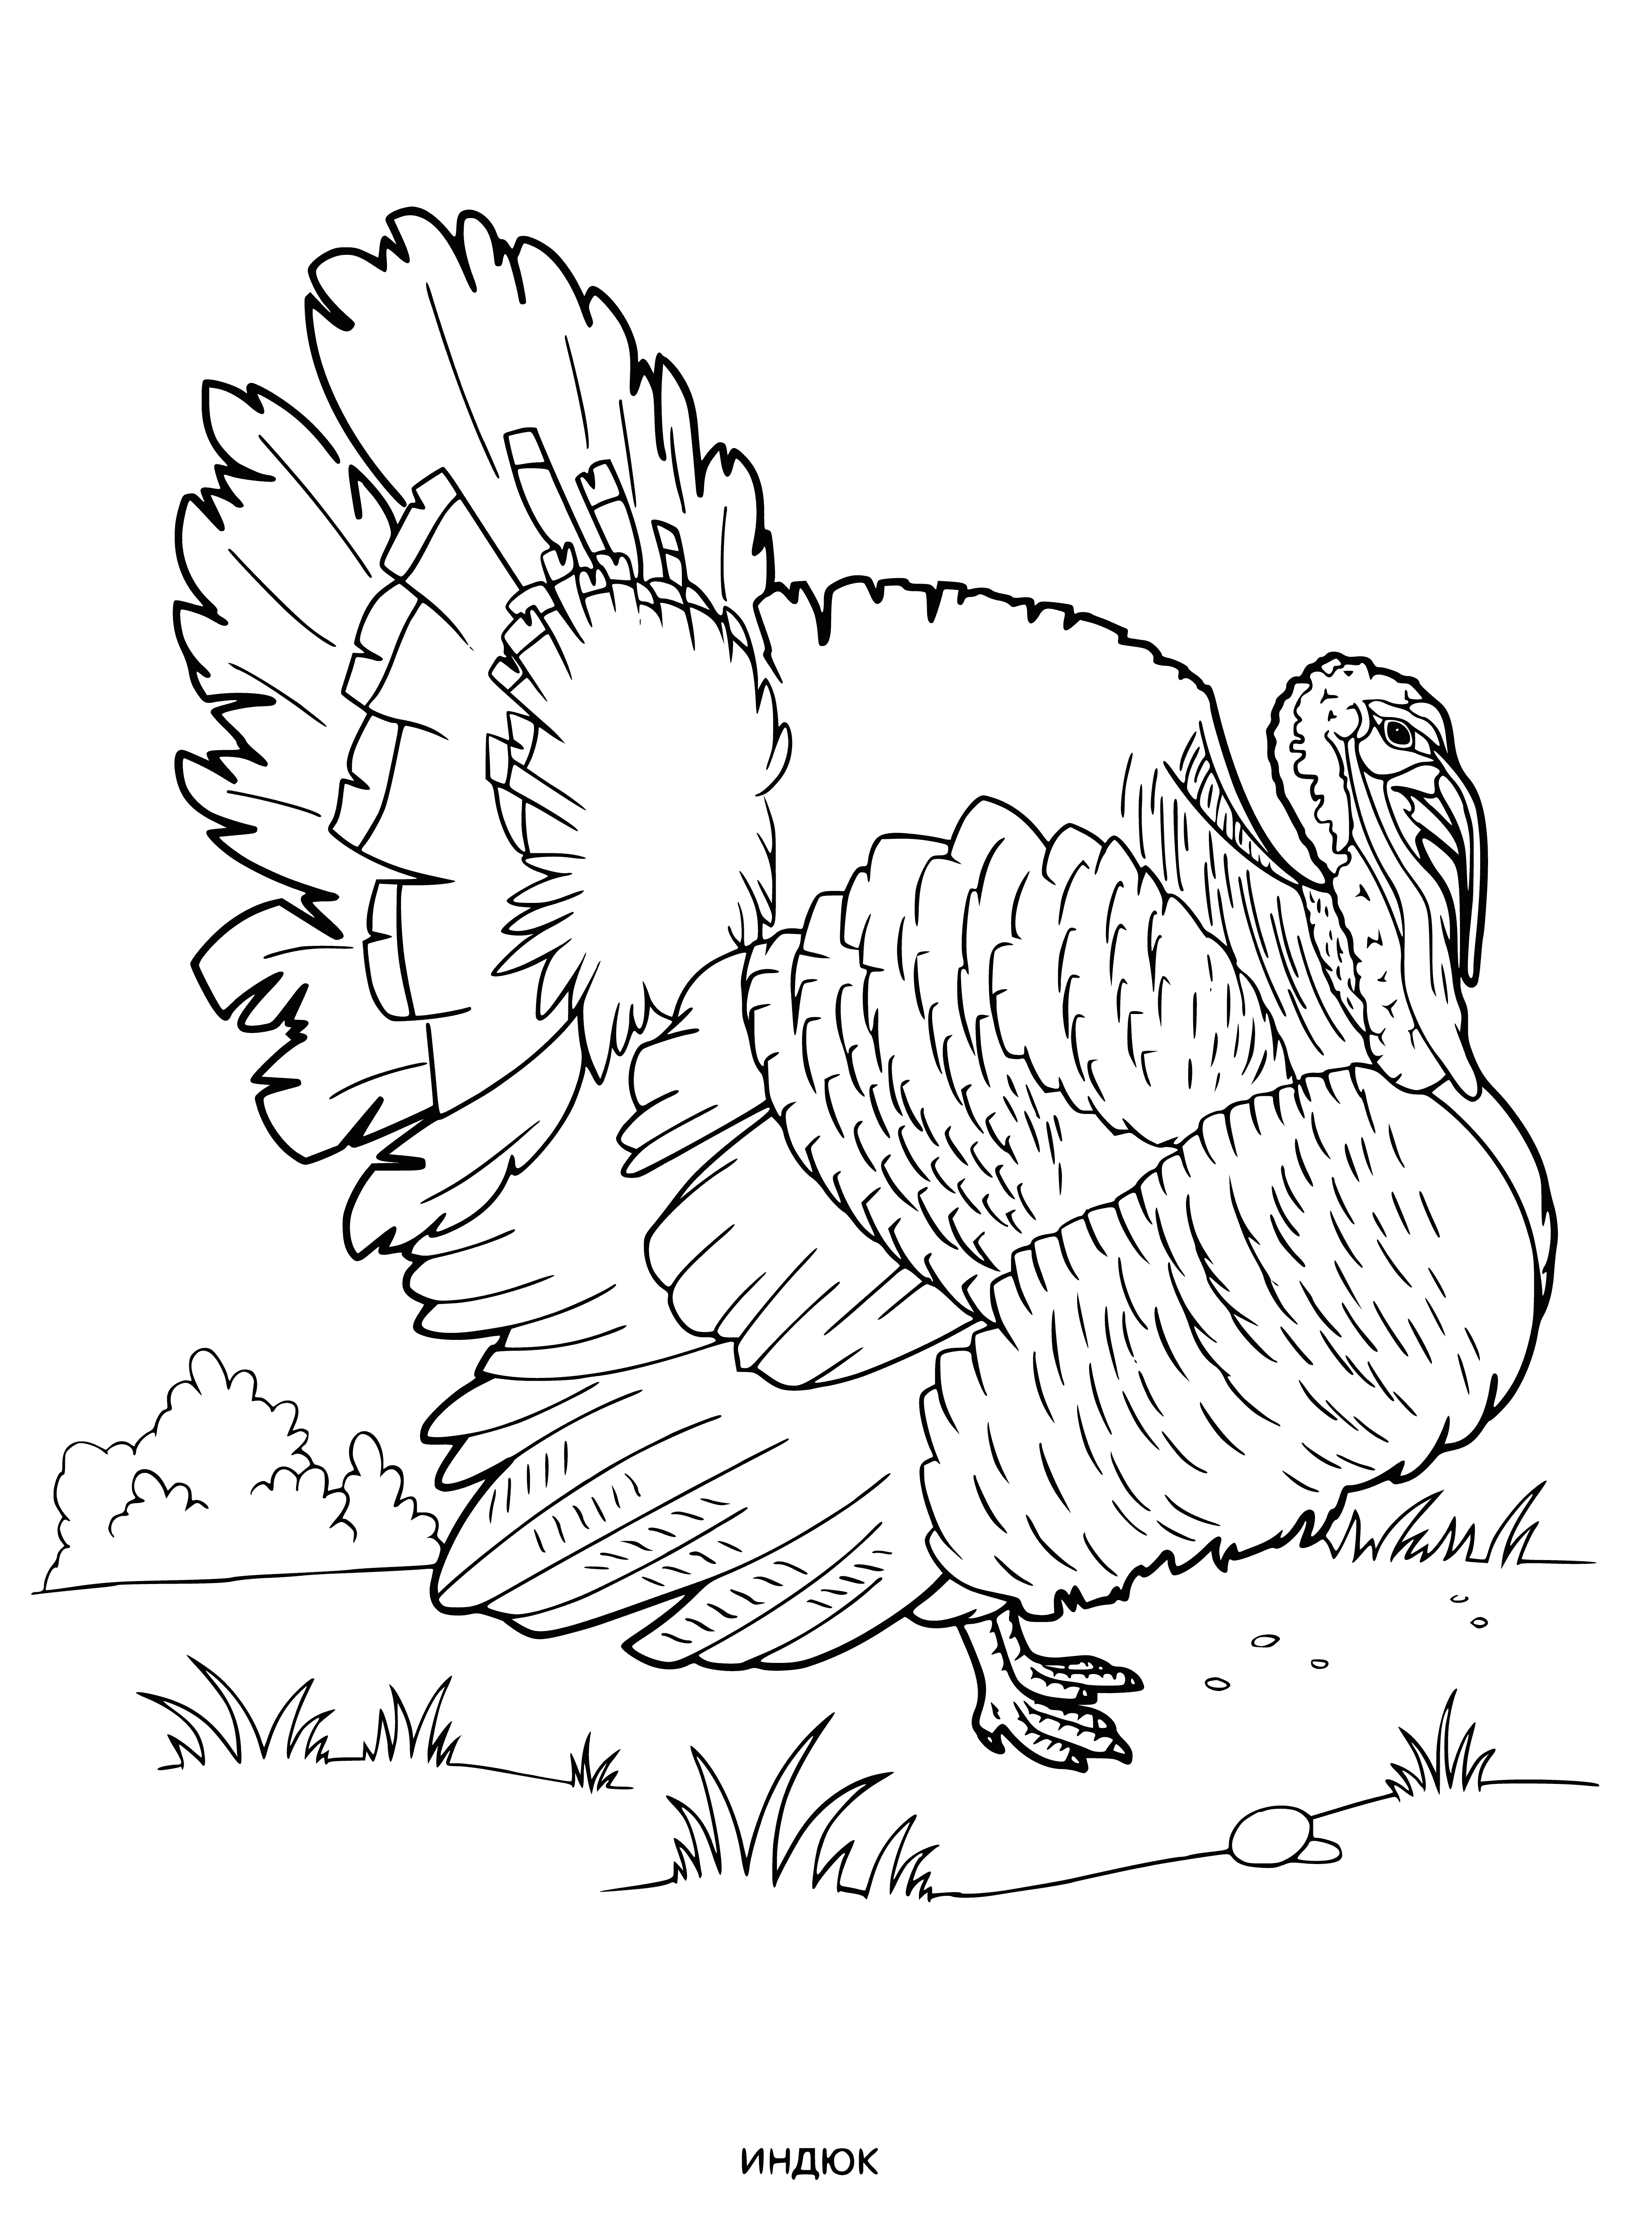 coloring page: 3 pets in the coloring page: 2 brown & white turkeys standing together & 1 all white turkey standing alone. #coloringpages